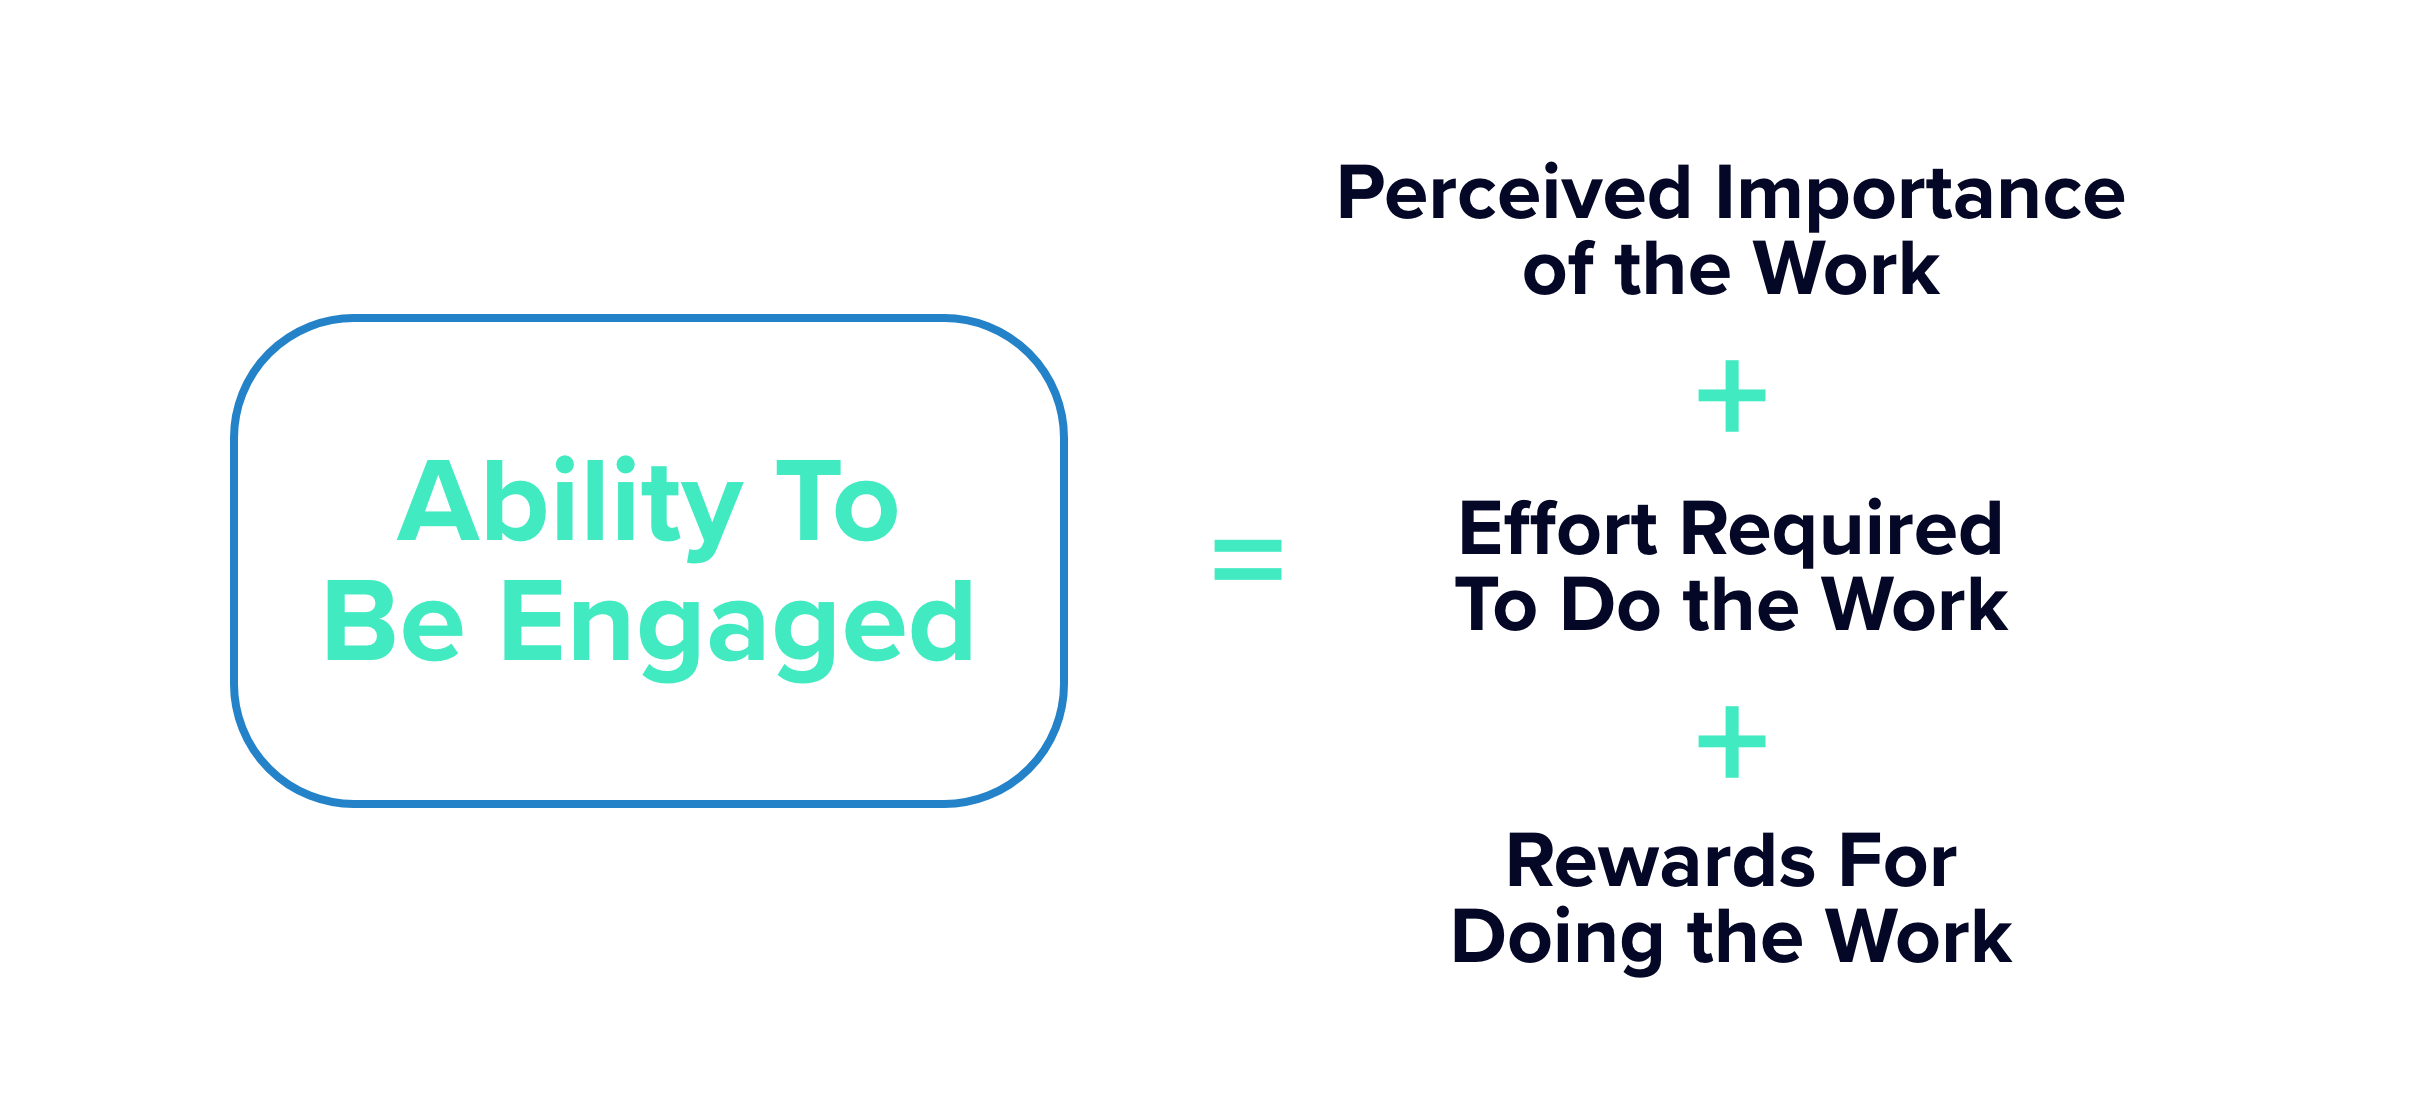 Ability to be Engaged = Perceived Importance of the Work + Effort Required to Do the Work + Rewards for Doing the Work